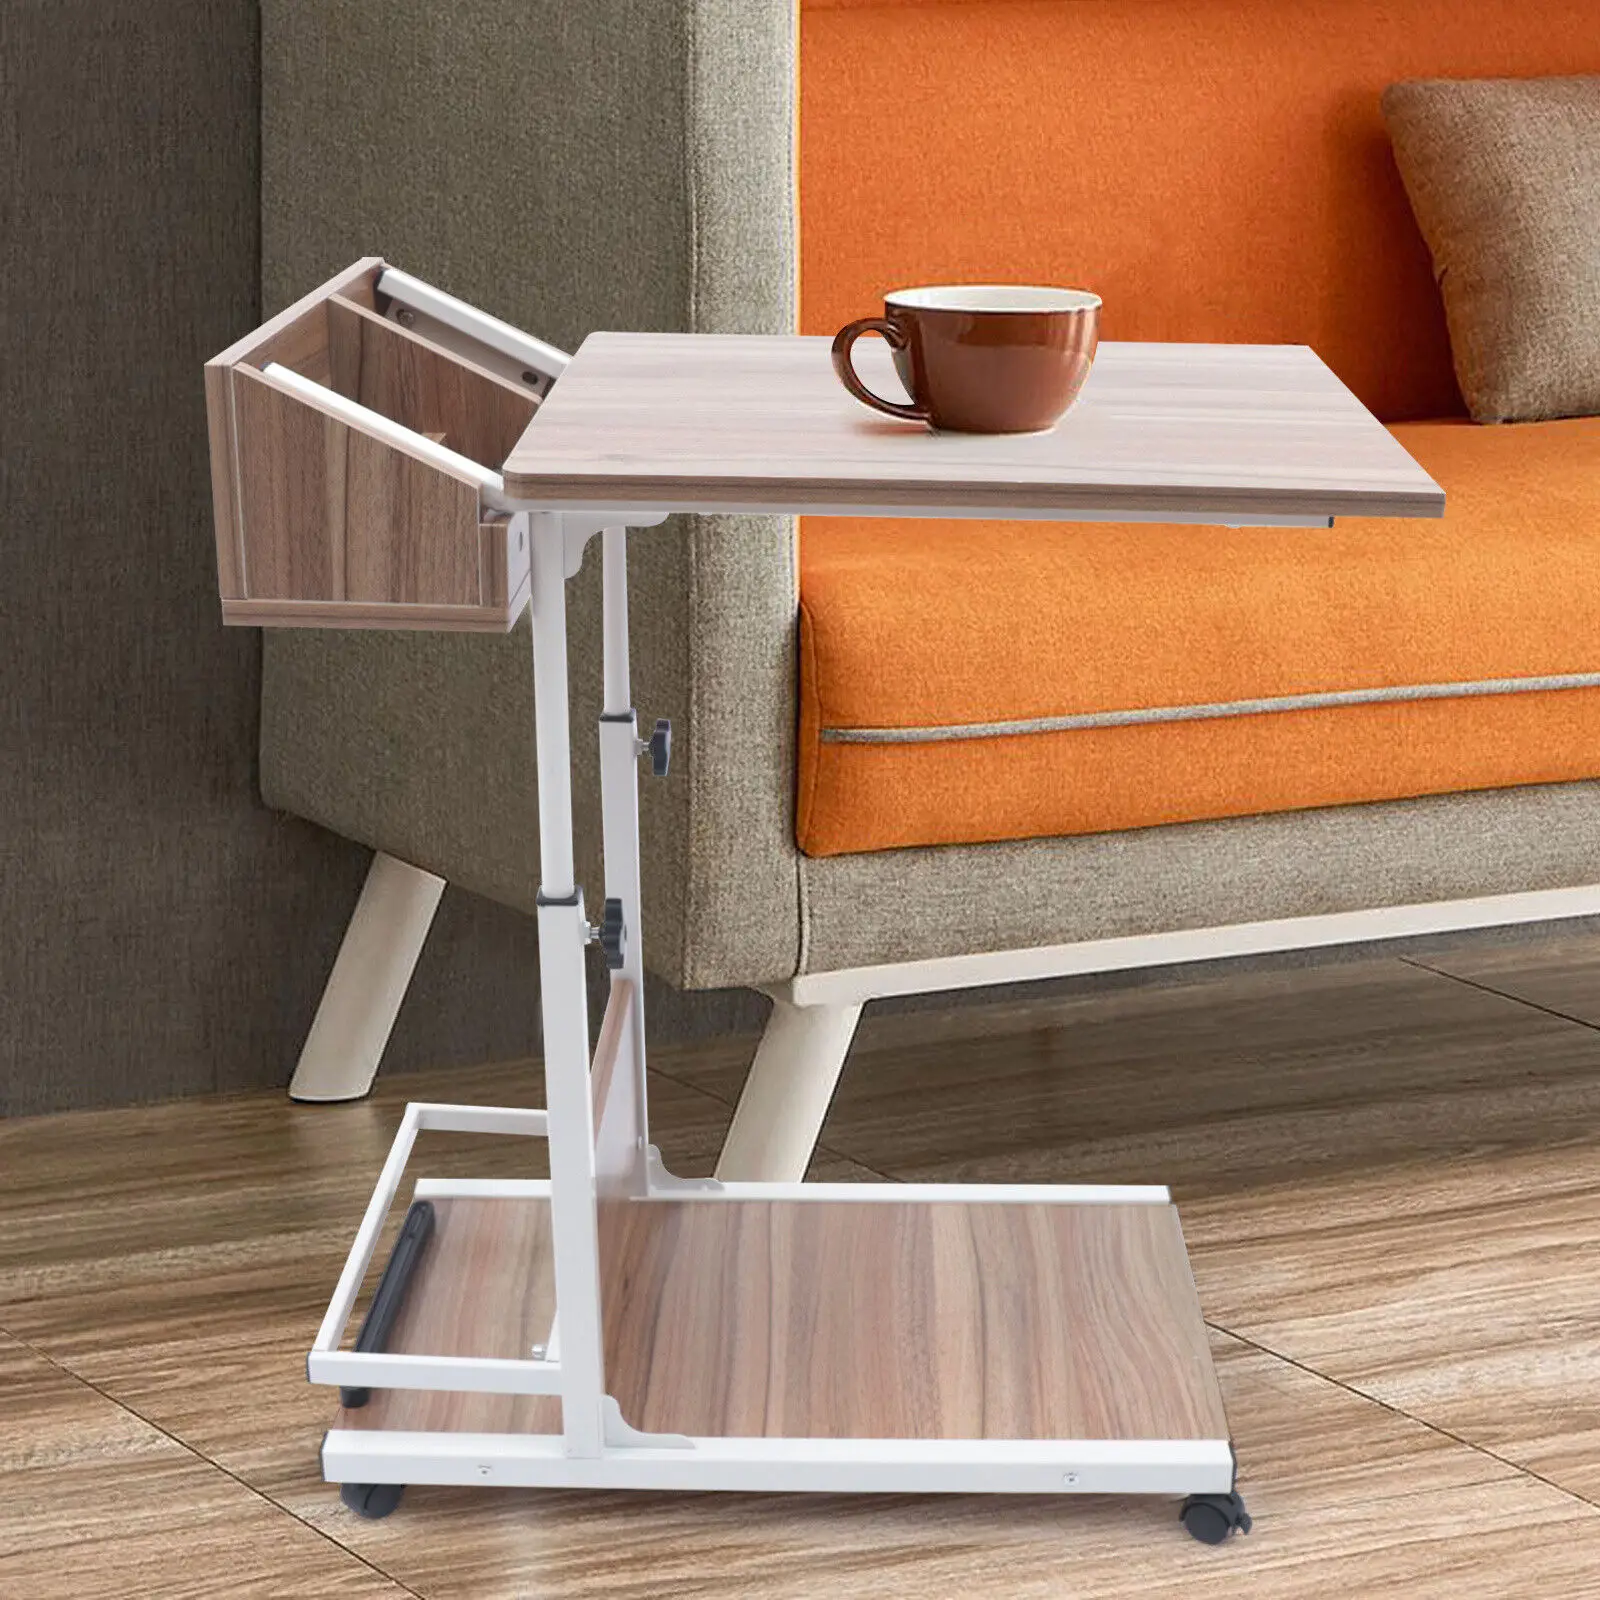 C Shaped End Table for Living Room Sofa Side Table Coffee Table Snack Table Tray with Storage and Casters Height Adjustable